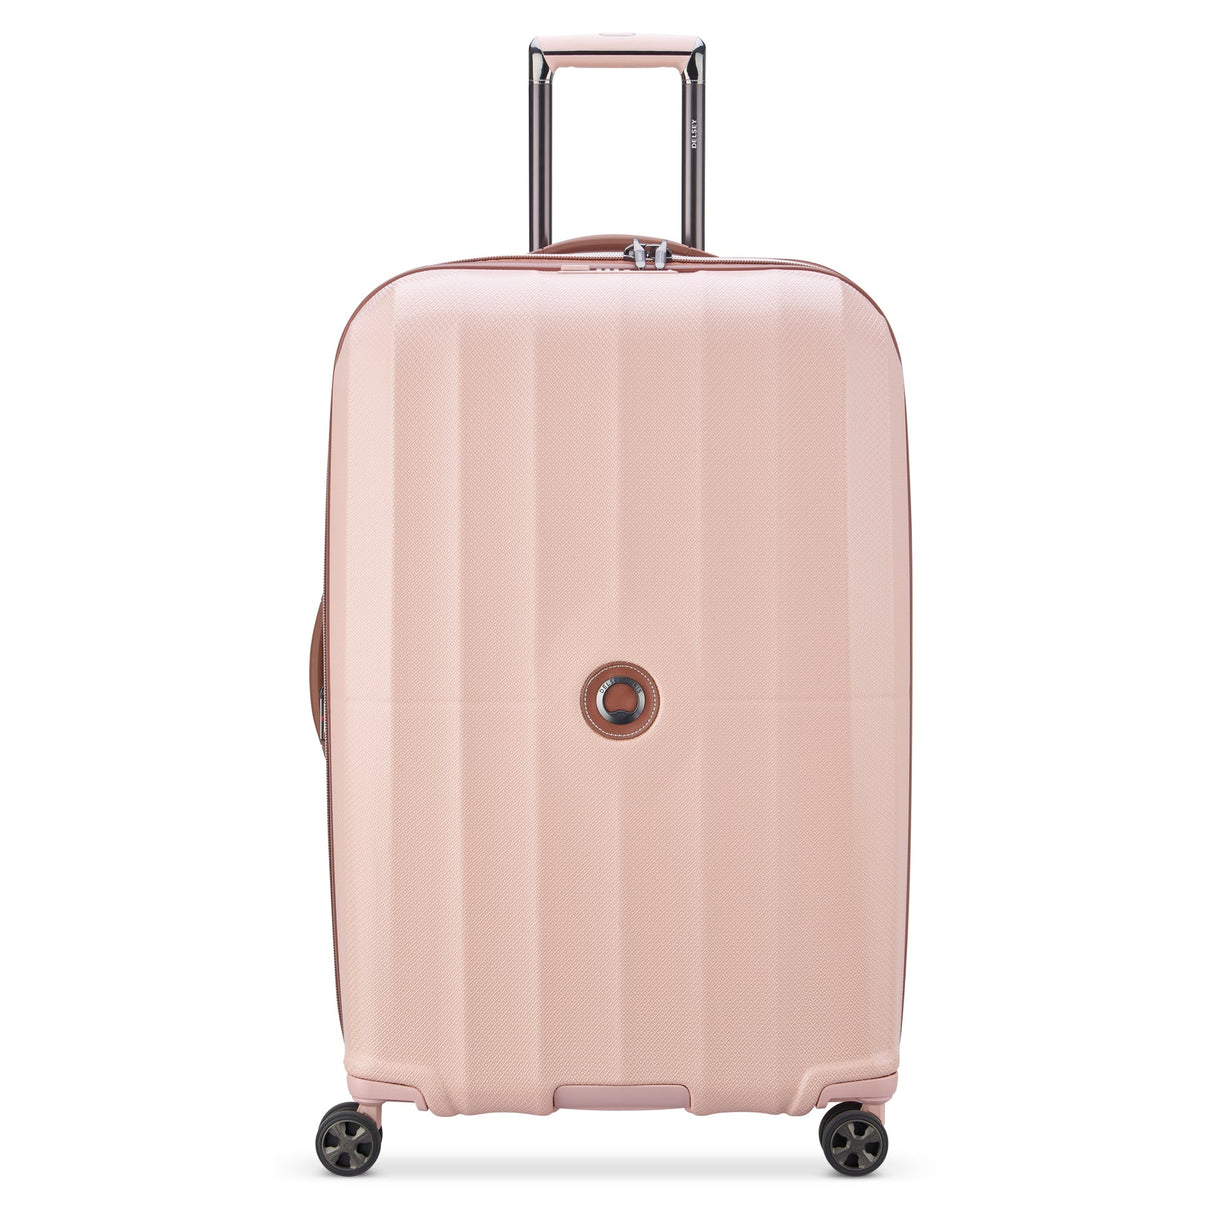 Delsey St Tropez Large Checked Expandable Spinner , Pink , delsey-st-tropez-40208783019-01_1800x1800_33aaa036-e1cf-45d3-bc88-3d7cee721fbe